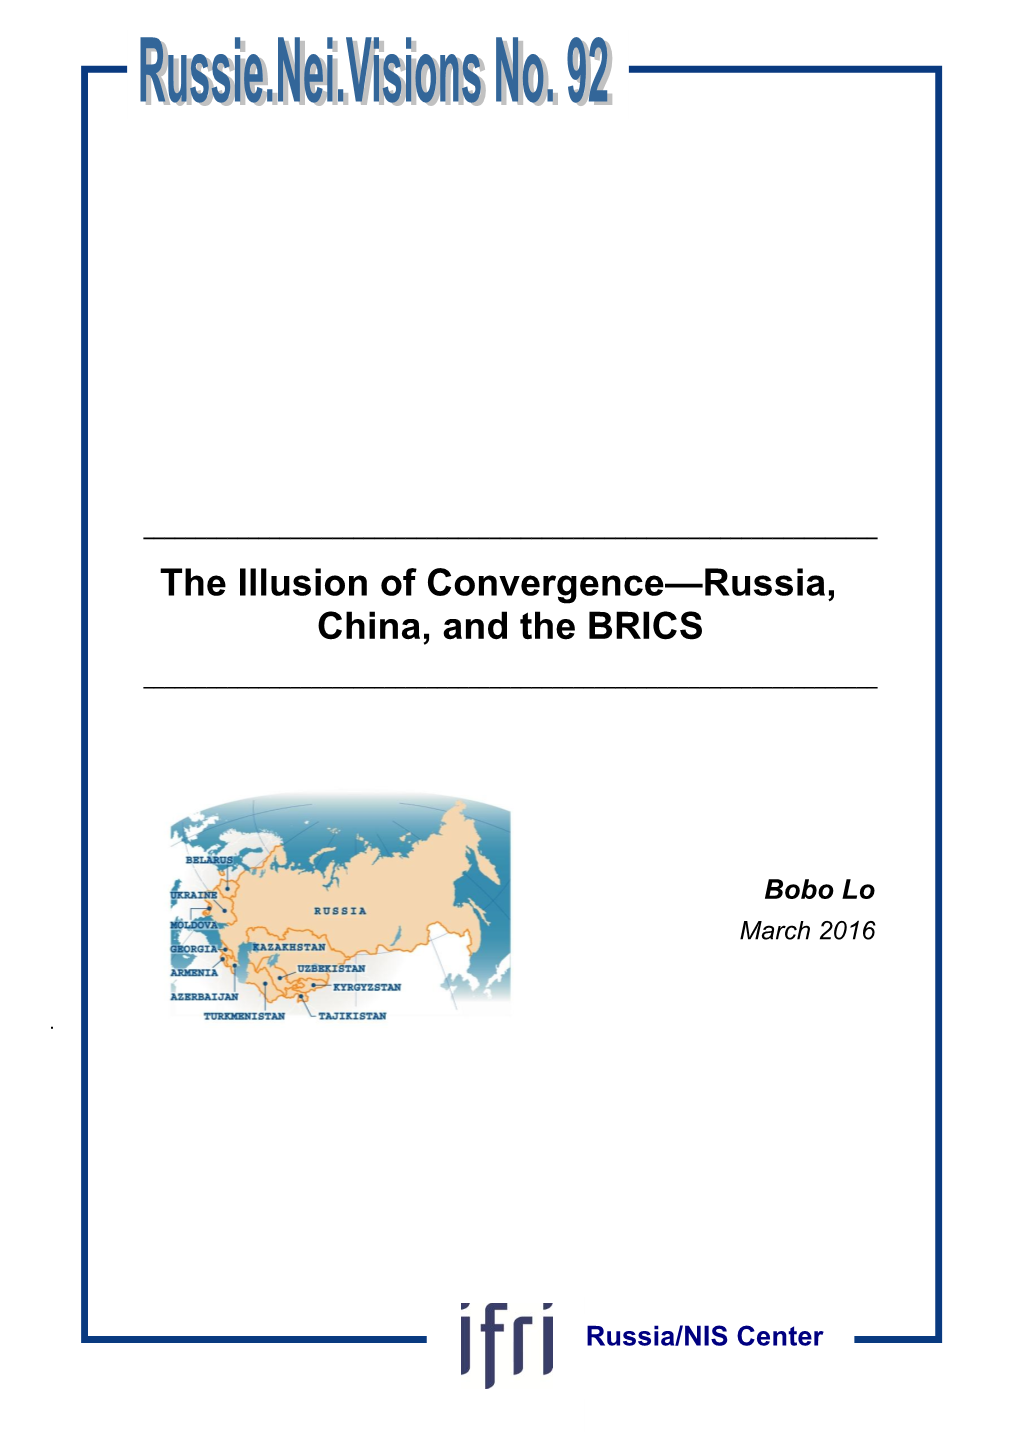 The Illusion of Convergence—Russia, China, and the BRICS